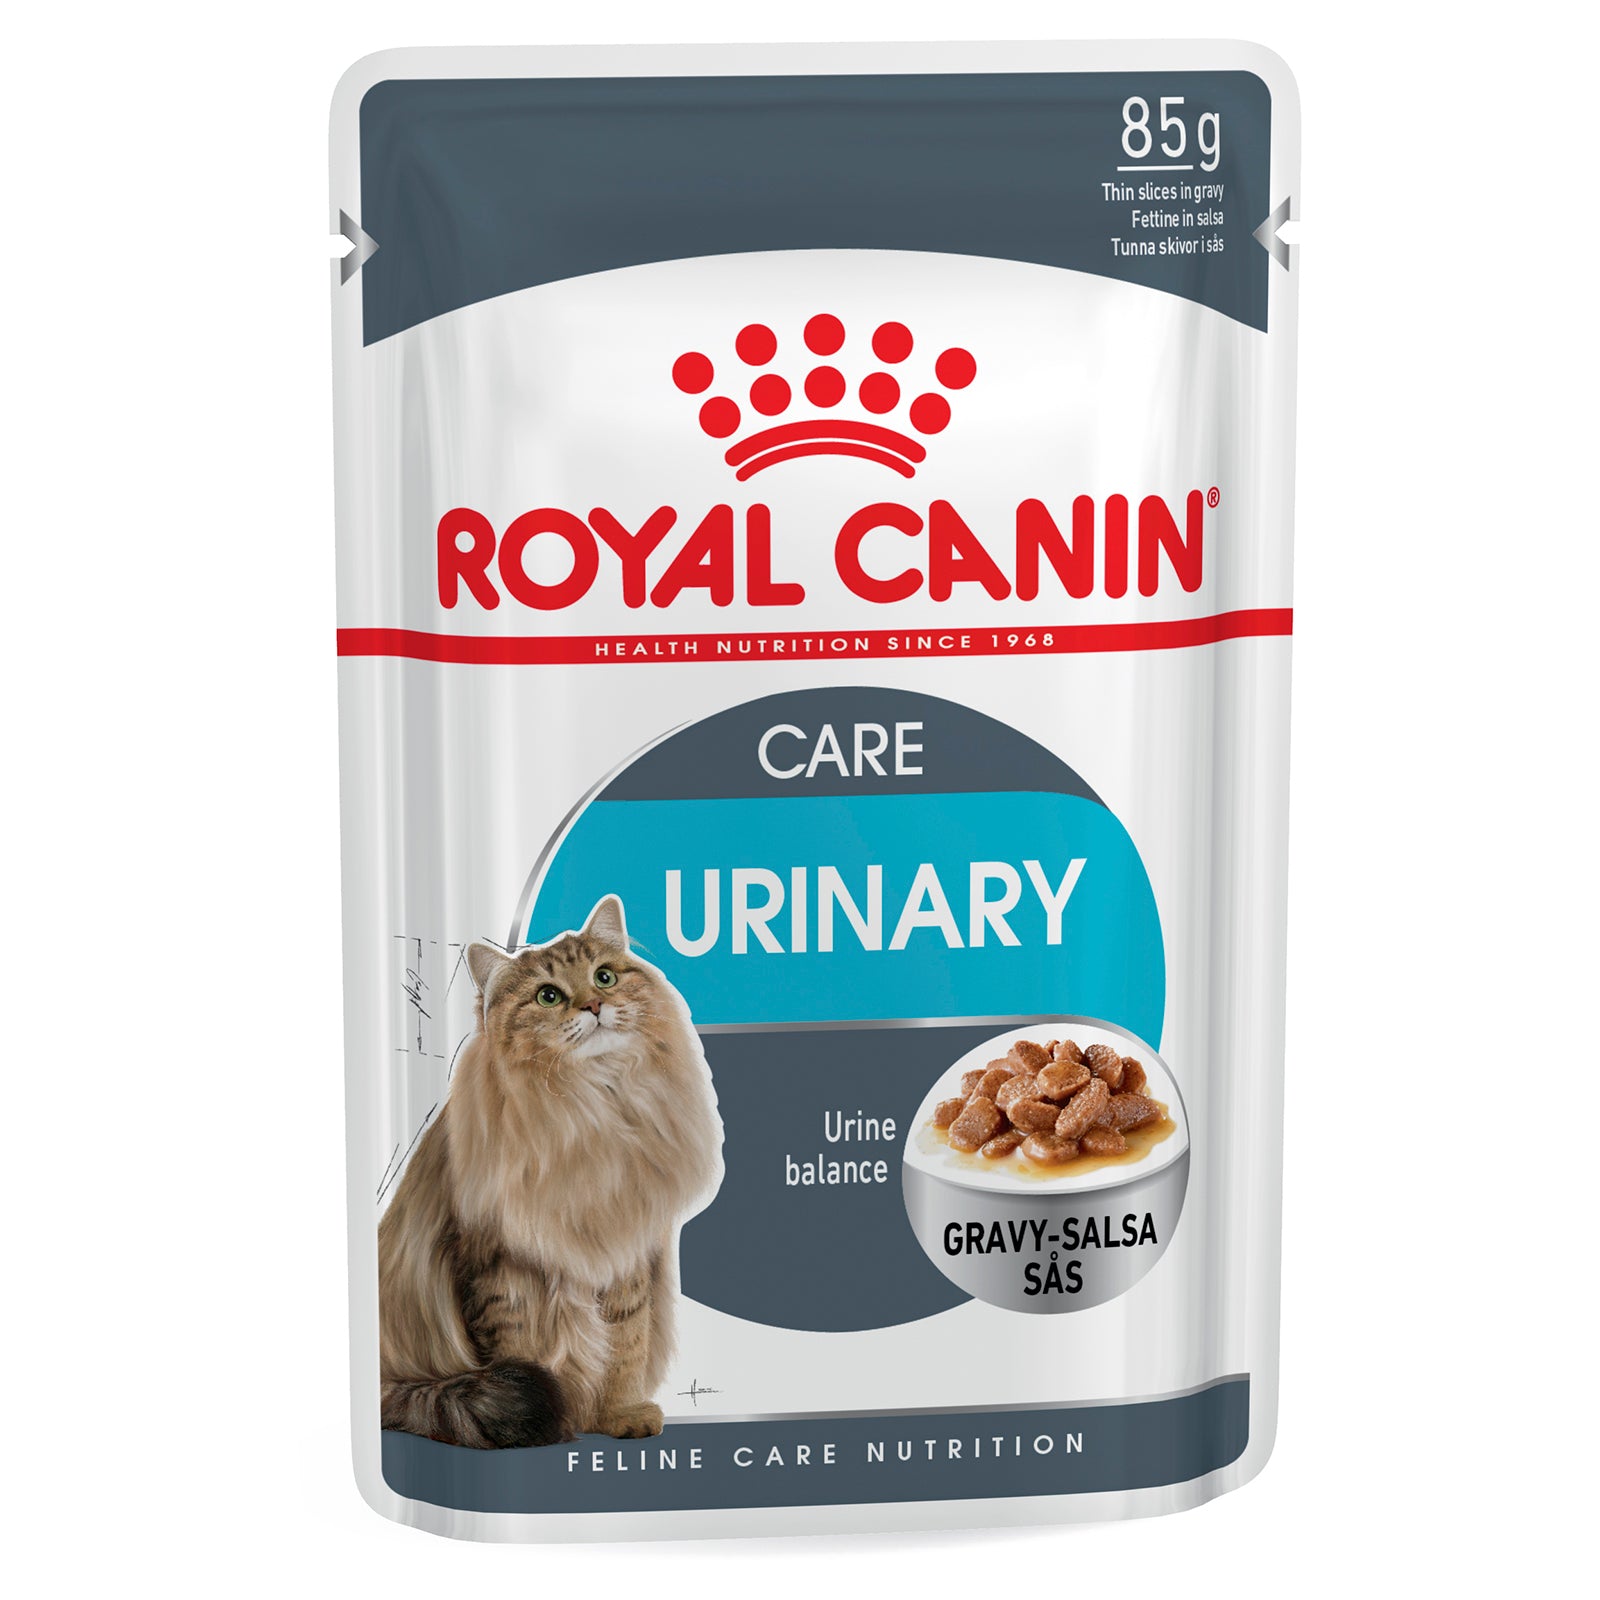 Royal Canin Cat Food Pouch Adult Urinary Care in Gravy